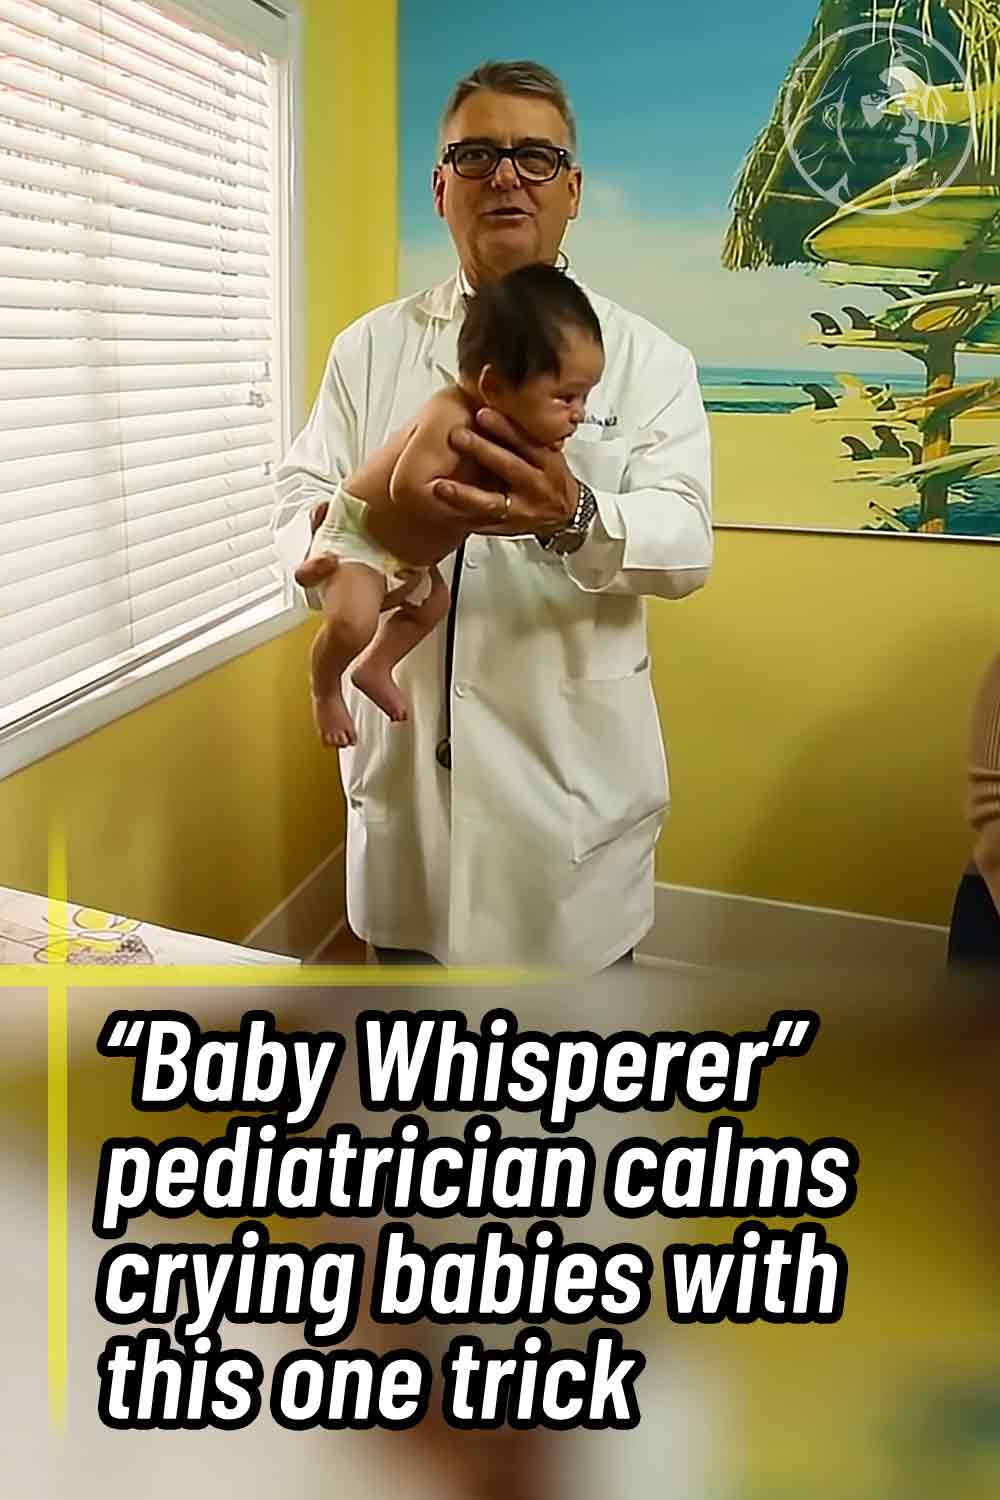 “Baby Whisperer” pediatrician calms crying babies with this one trick